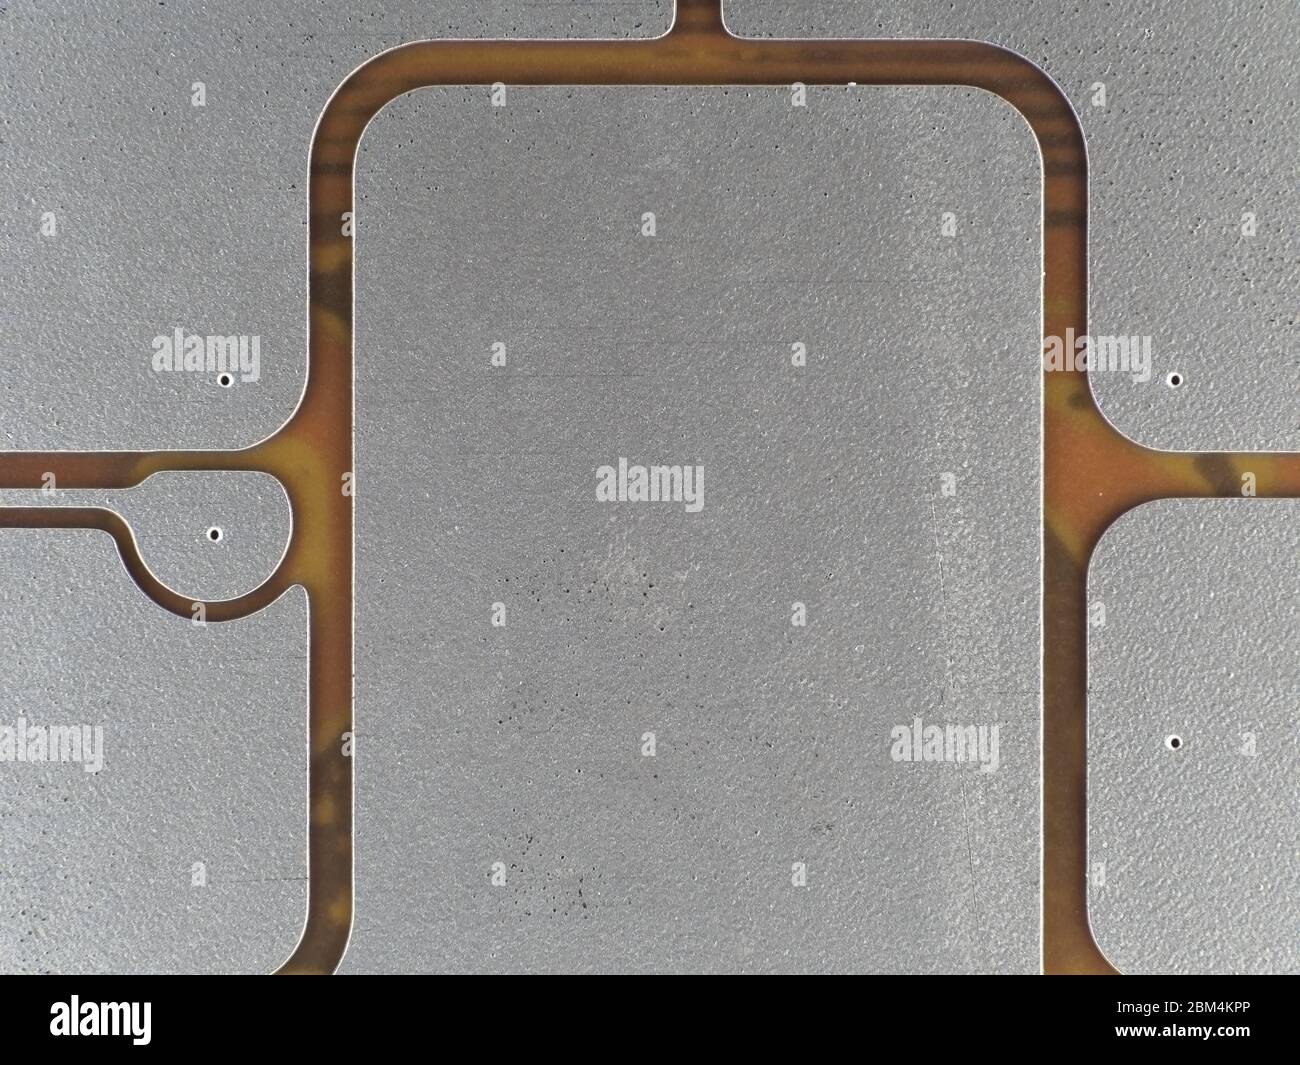 Credit card chip contacts under low-power microscope Stock Photo